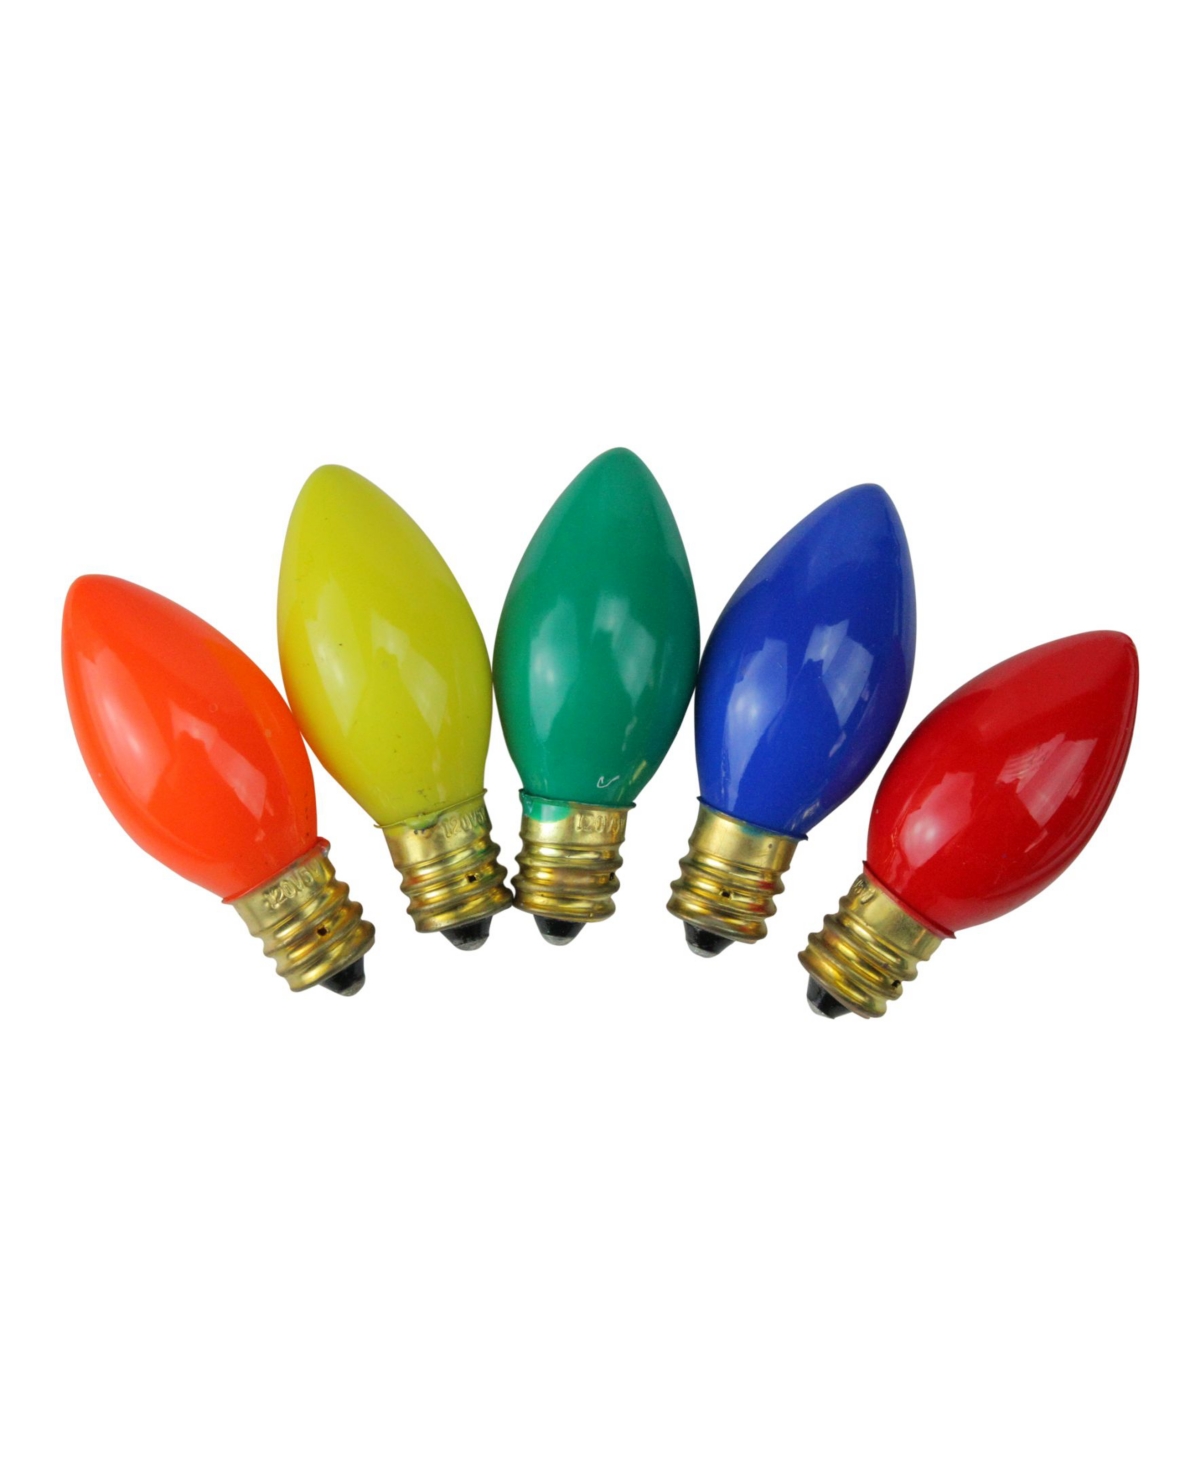 Northlight Pack Of 25 Incandescent C7 Opaque Multi-color Christmas Replacement Bulbs